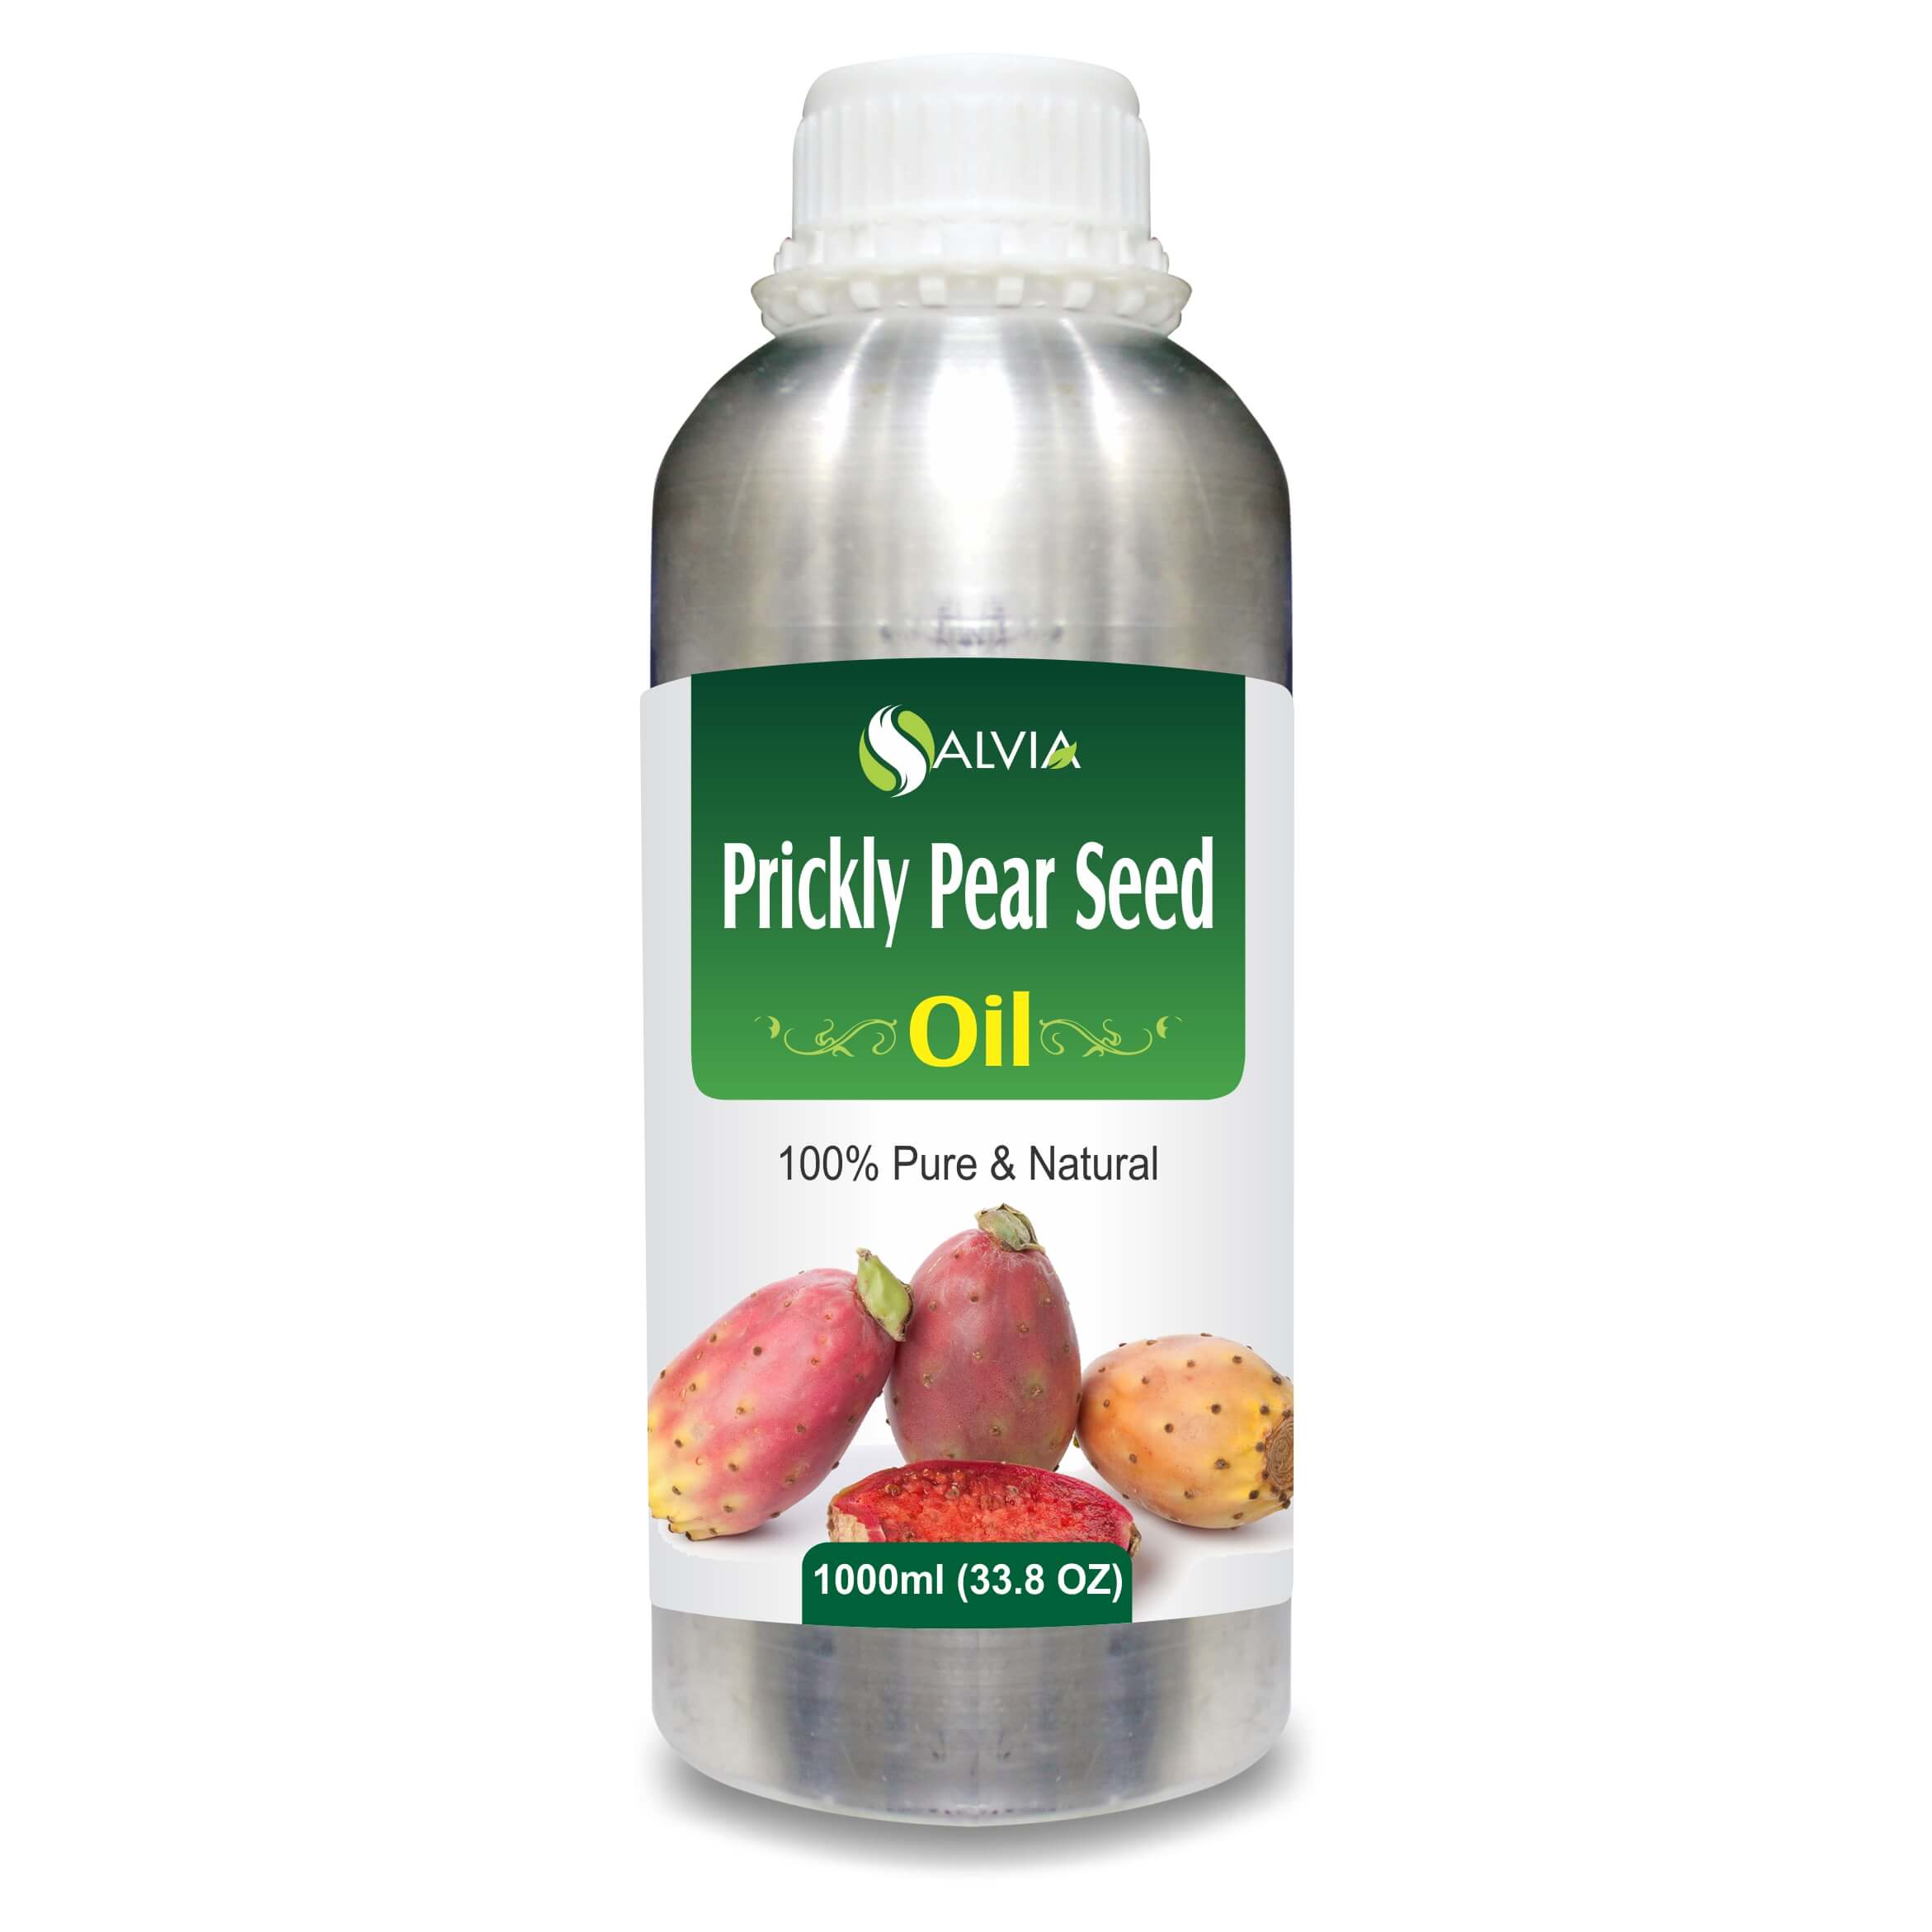 Salvia Natural Carrier Oils Prickly Pear Seed Oil (Opuntia Ficus-Indica) Natural Pure Carrier Oil